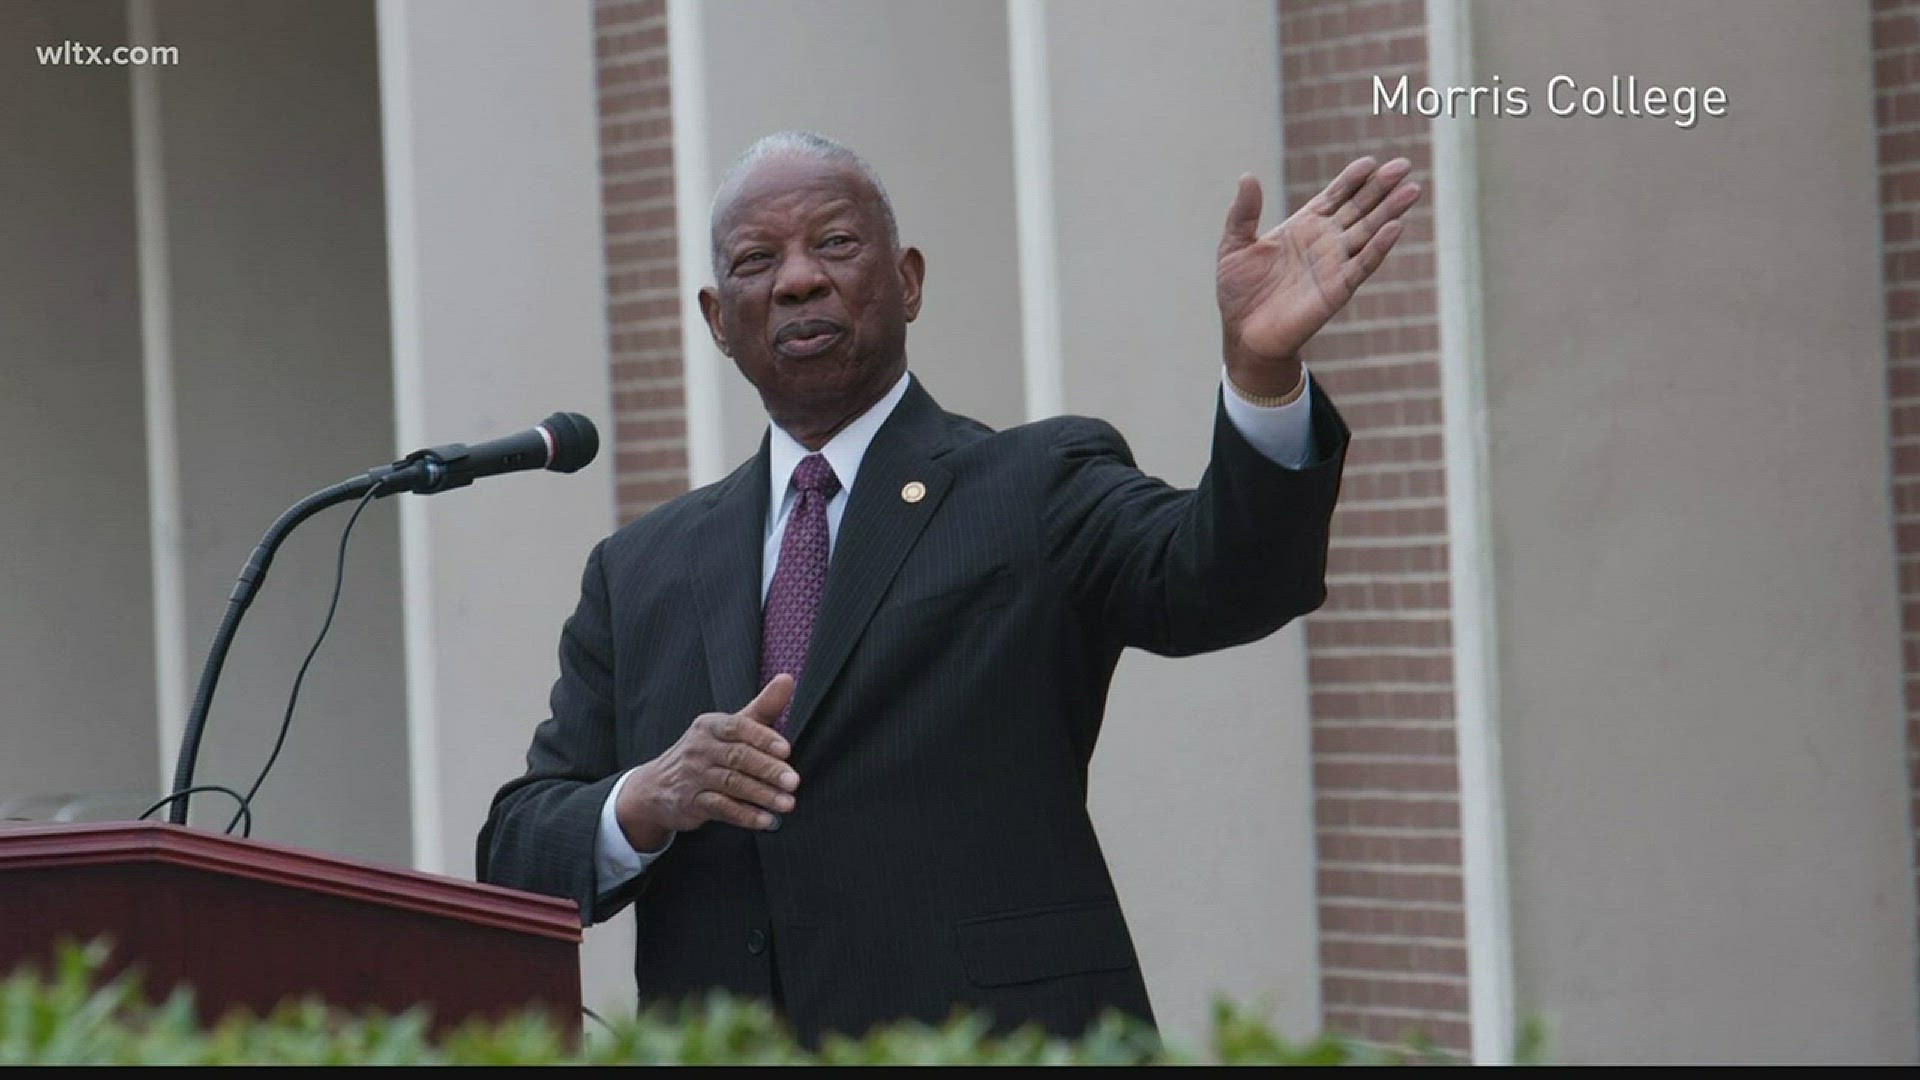 Dr. Luns Richardson led Morris College for a remarkable 43 years.